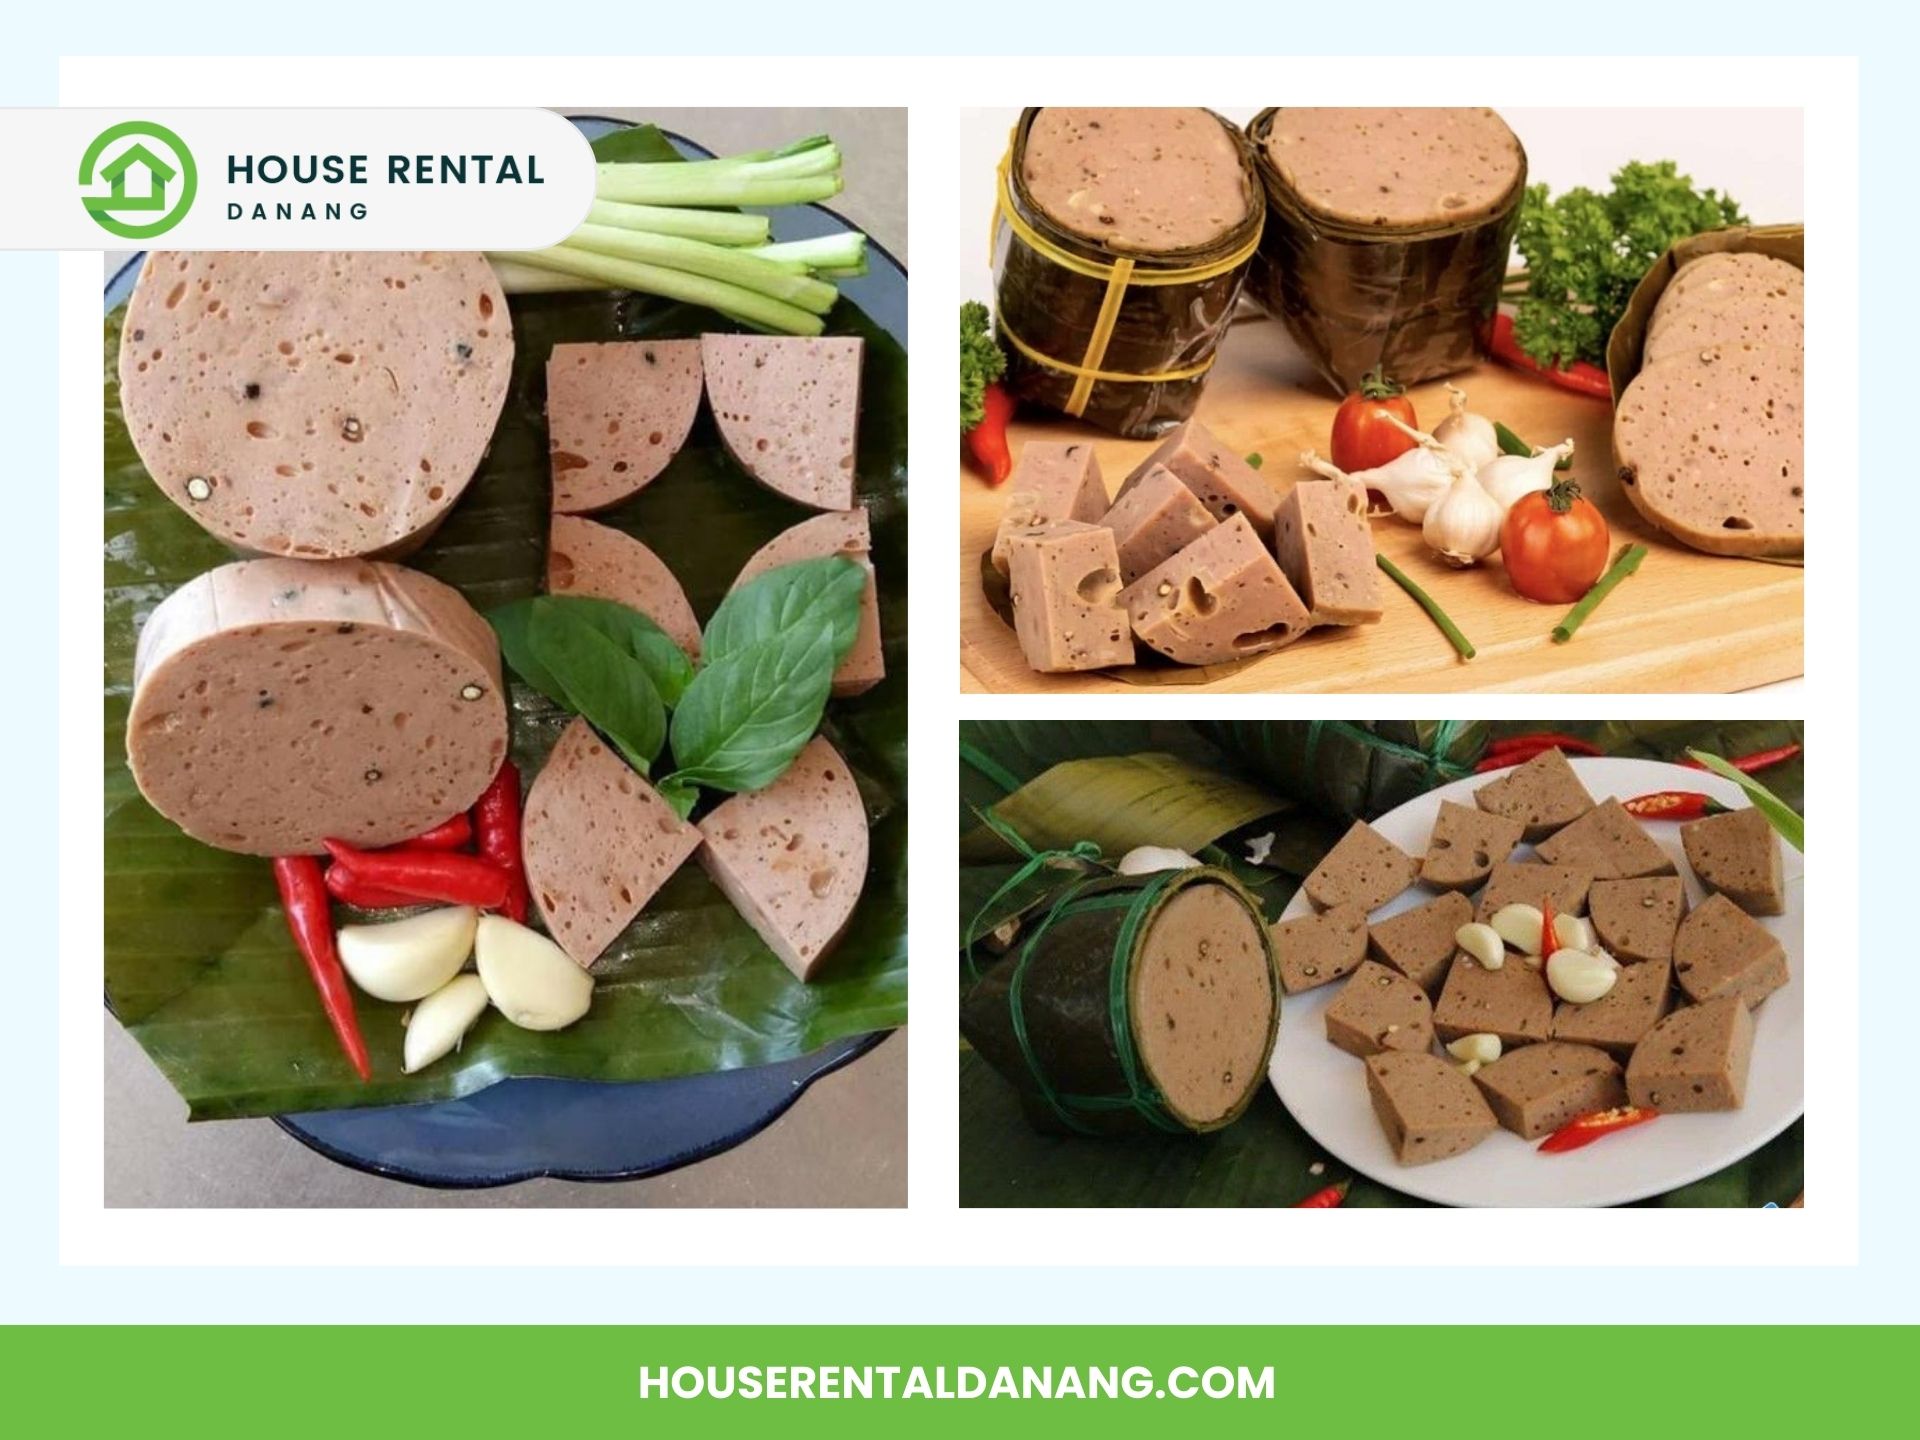 Three images display sliced Vietnamese pork sausage arranged with herbs, garlic, and chili peppers. Branding for "House Rental Danang" is present on the top left corner, with a website link at the bottom. Explore the best places for shopping in Da Nang while enjoying local delicacies like these.